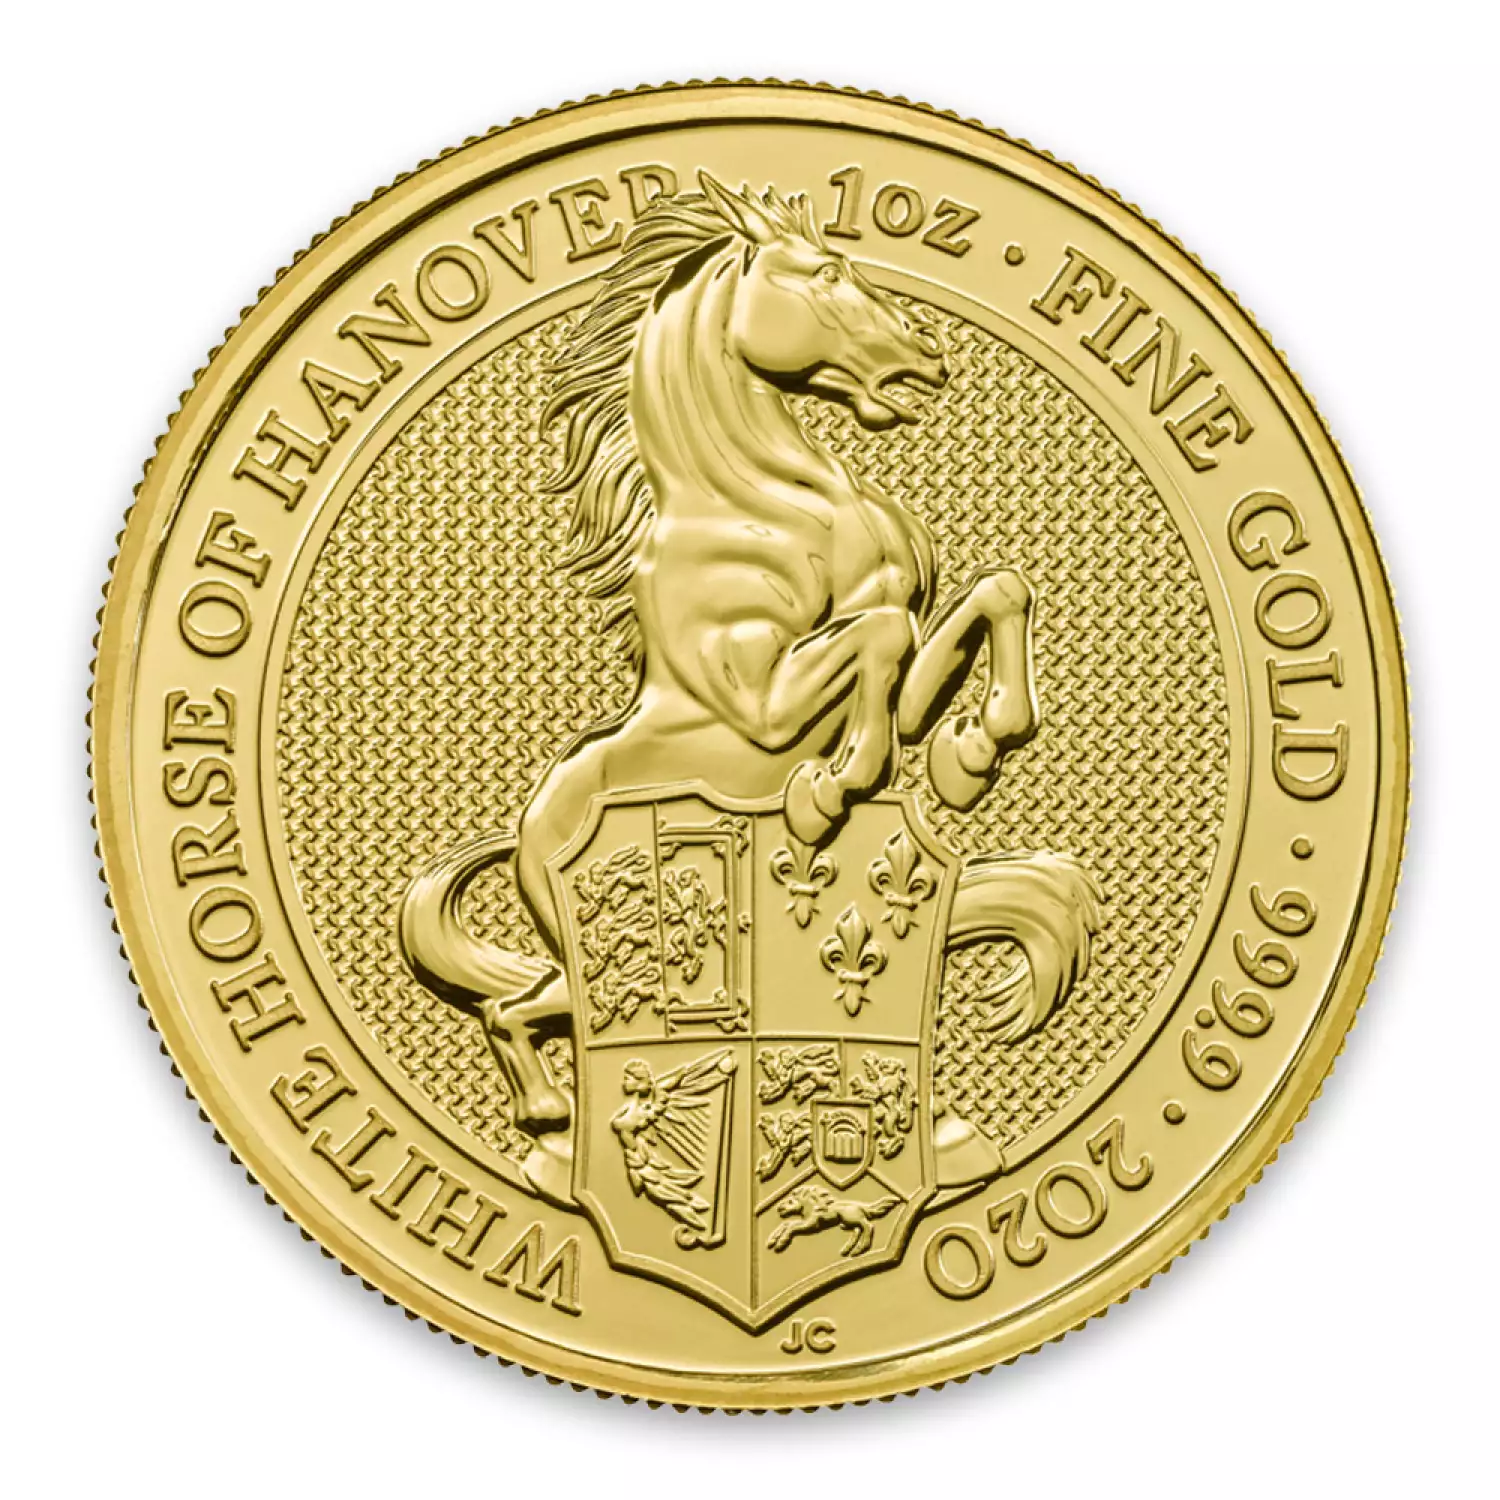 2020 1oz Gold Britain Queen's Beast - The White Horse of Hanover (2)